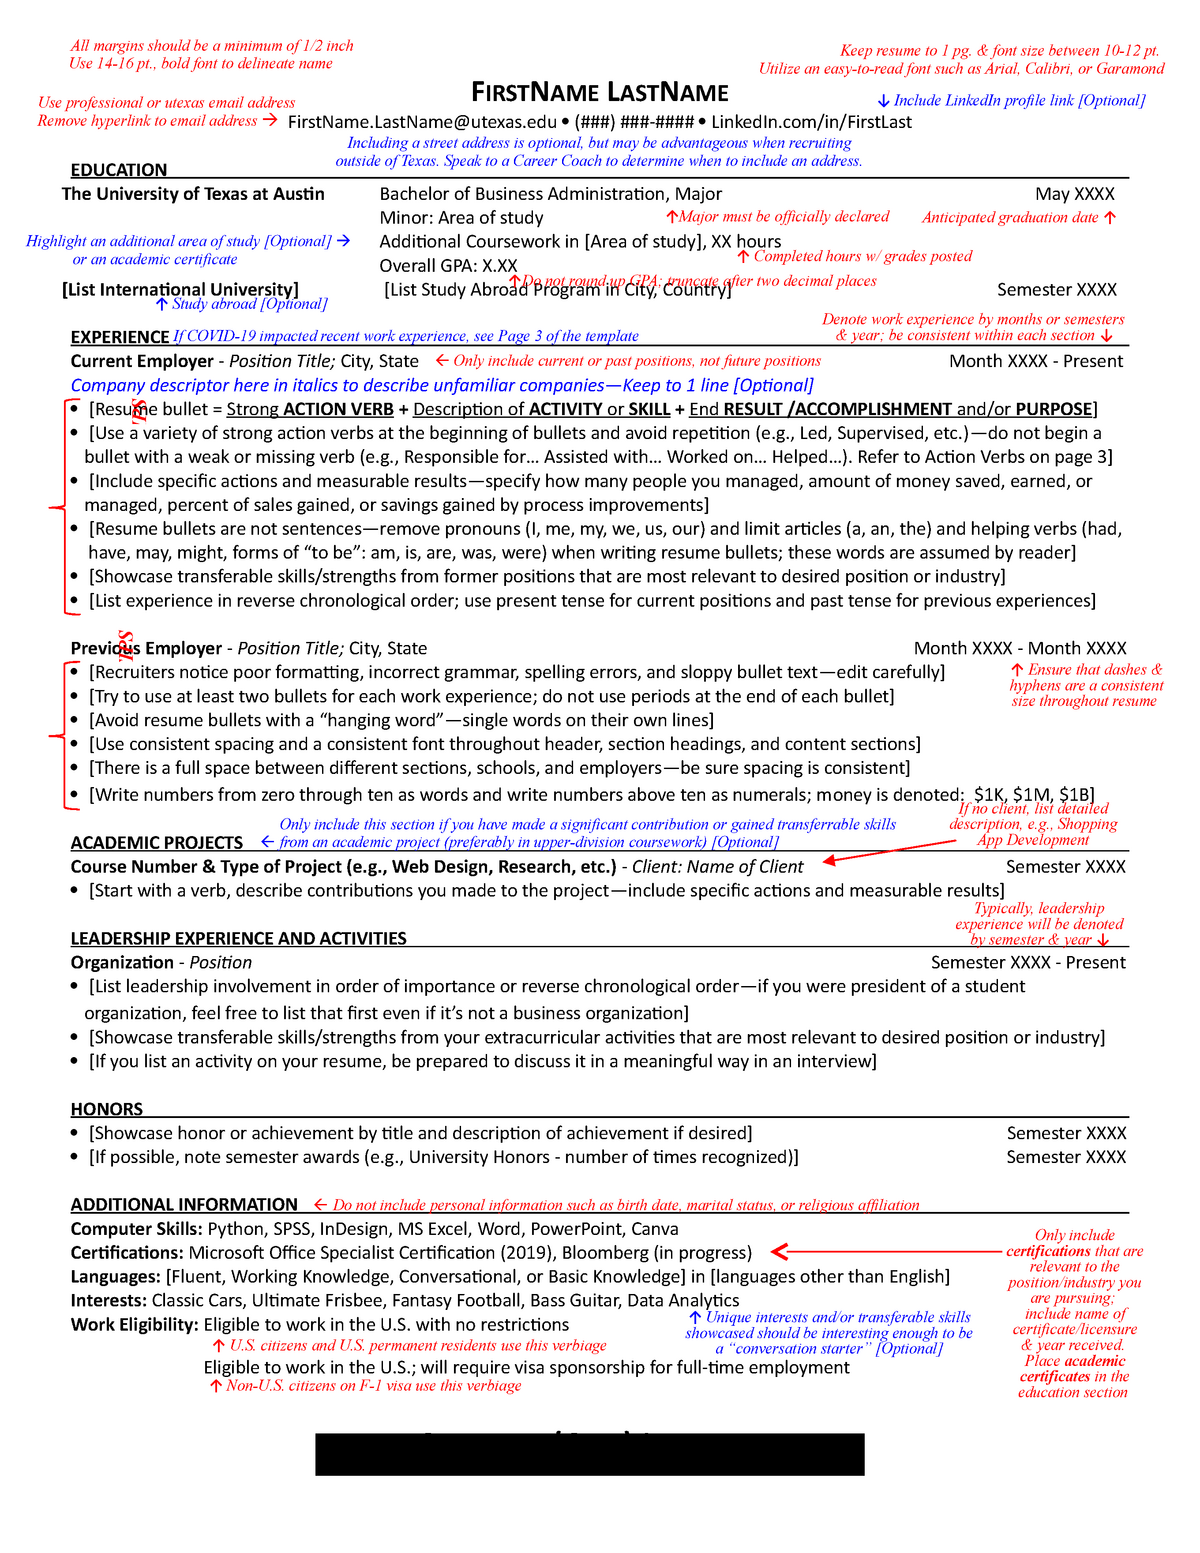 Recruit Mc Combs BBA Resume Template FIRSTNAME LASTNAME FirstName